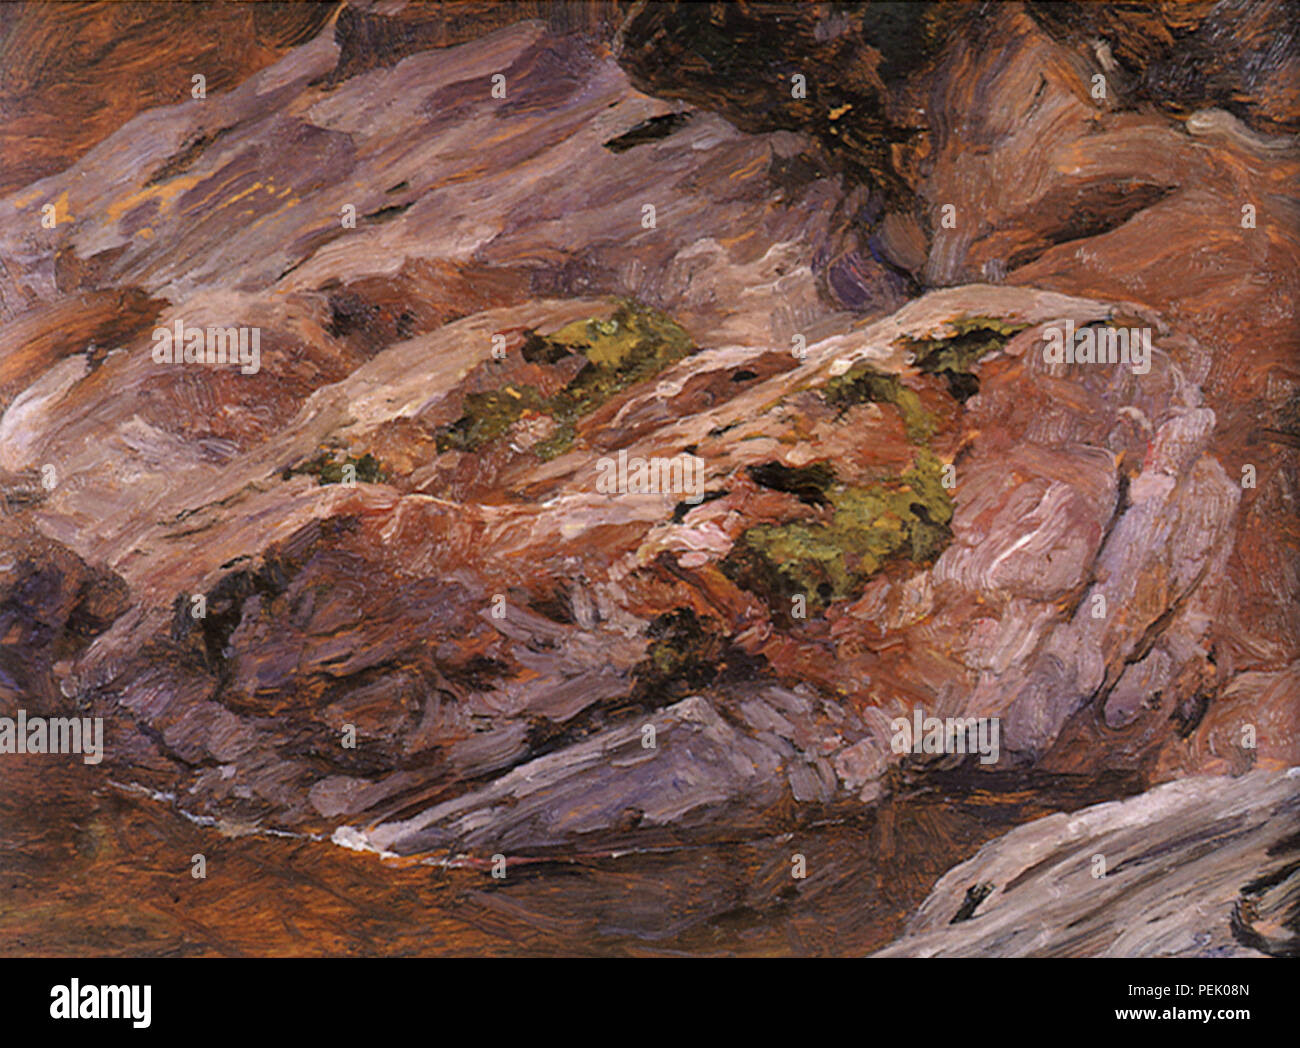 River and Boulders, Leighton, Frederic Stock Photo